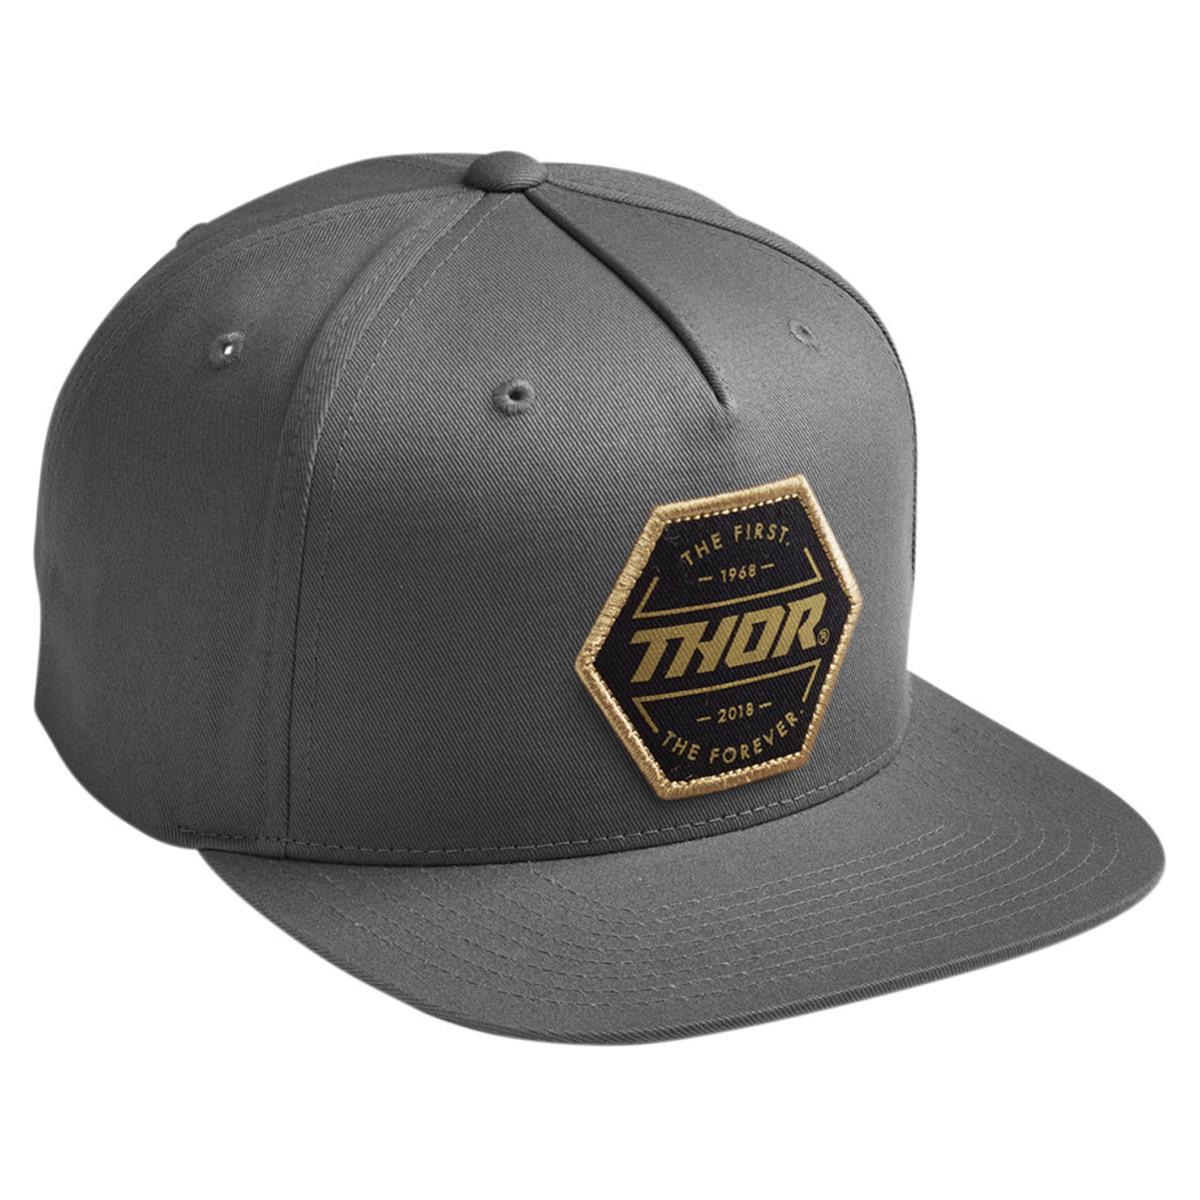 Thor Casquette Snap Back Forever Charcoal